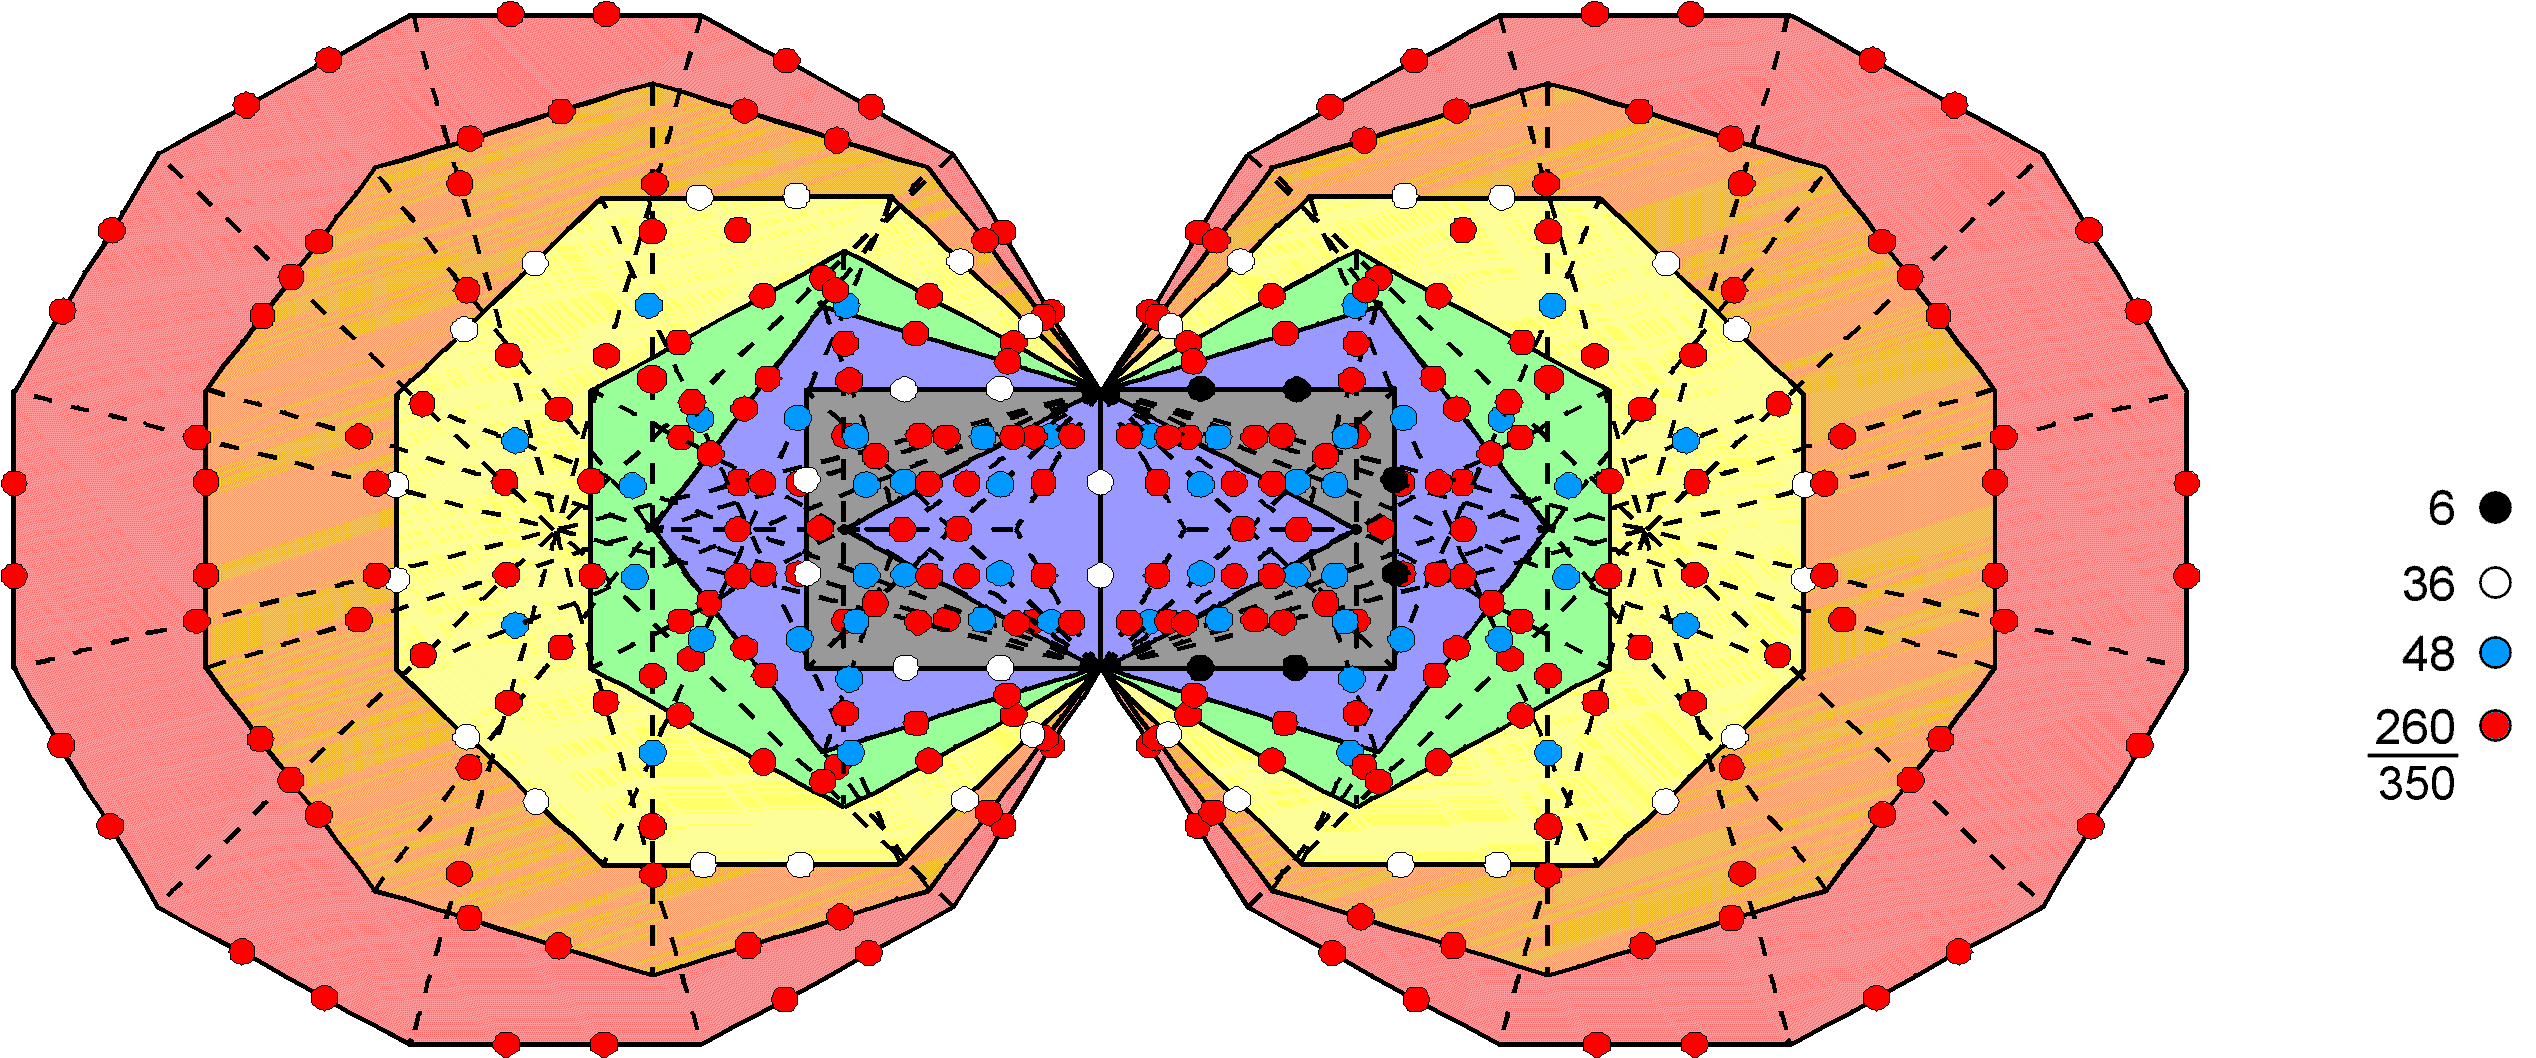 350 yods on sides of tetractyses in inner Tree of Life